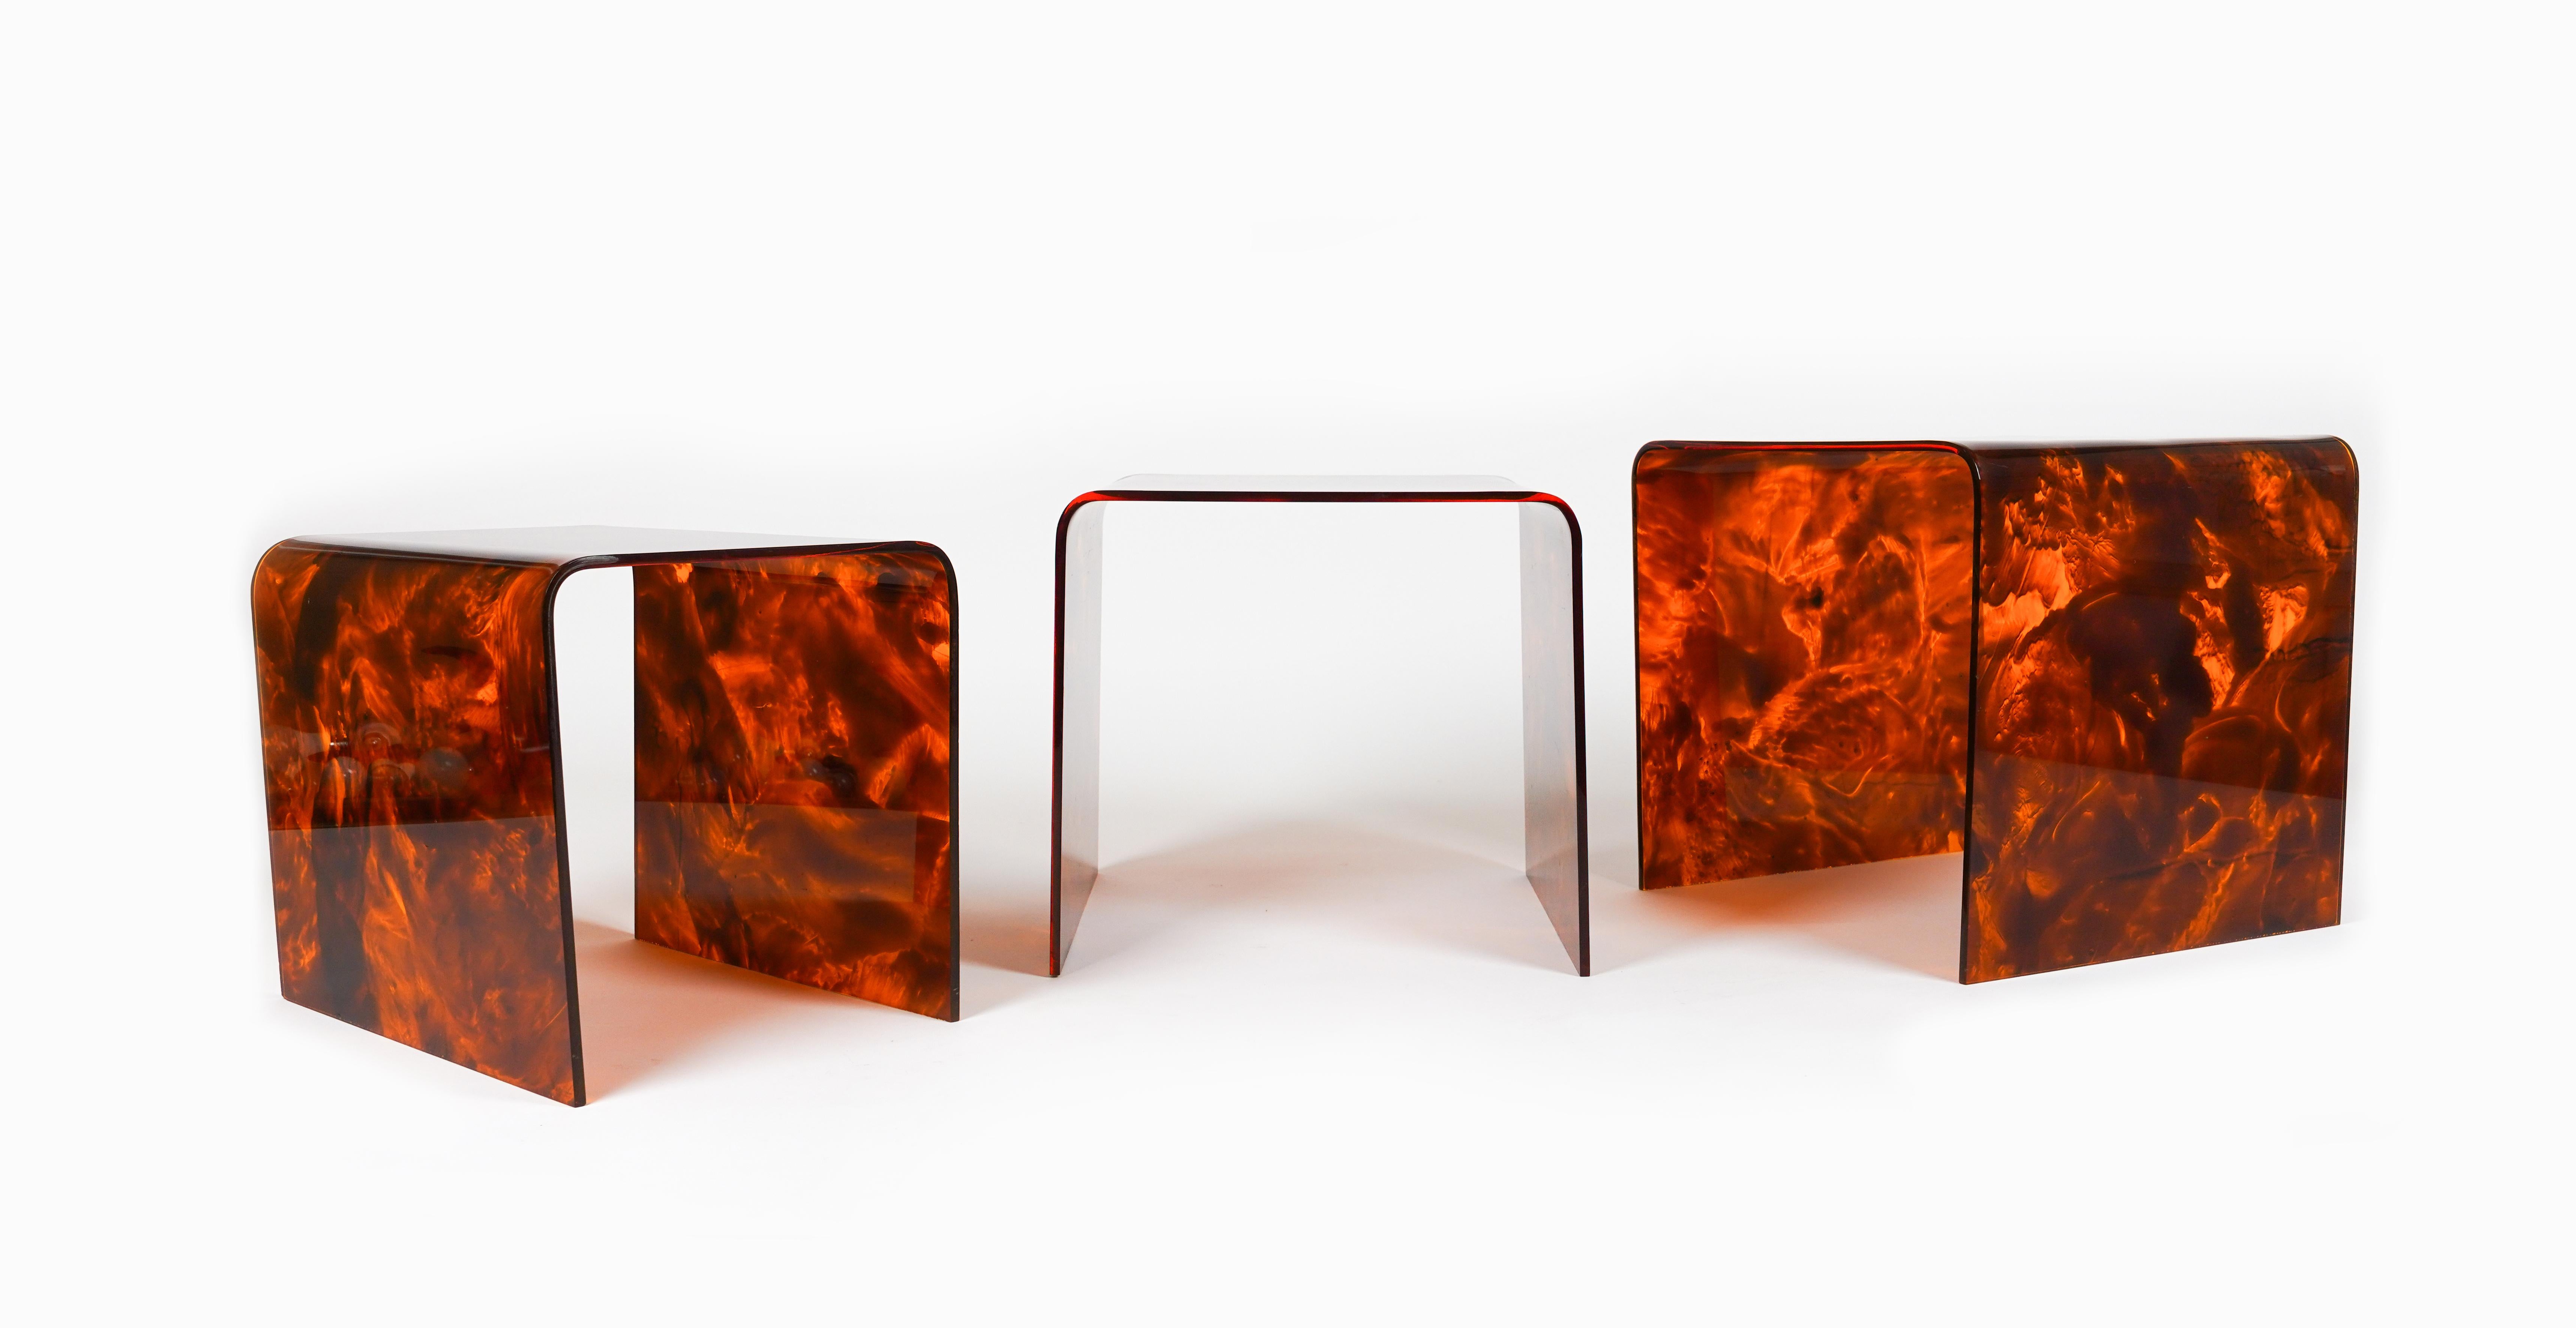 Set of 3 Nesting Tables in Lucite Faux Tortoiseshell Christian Dior, Italy 1970s For Sale 2